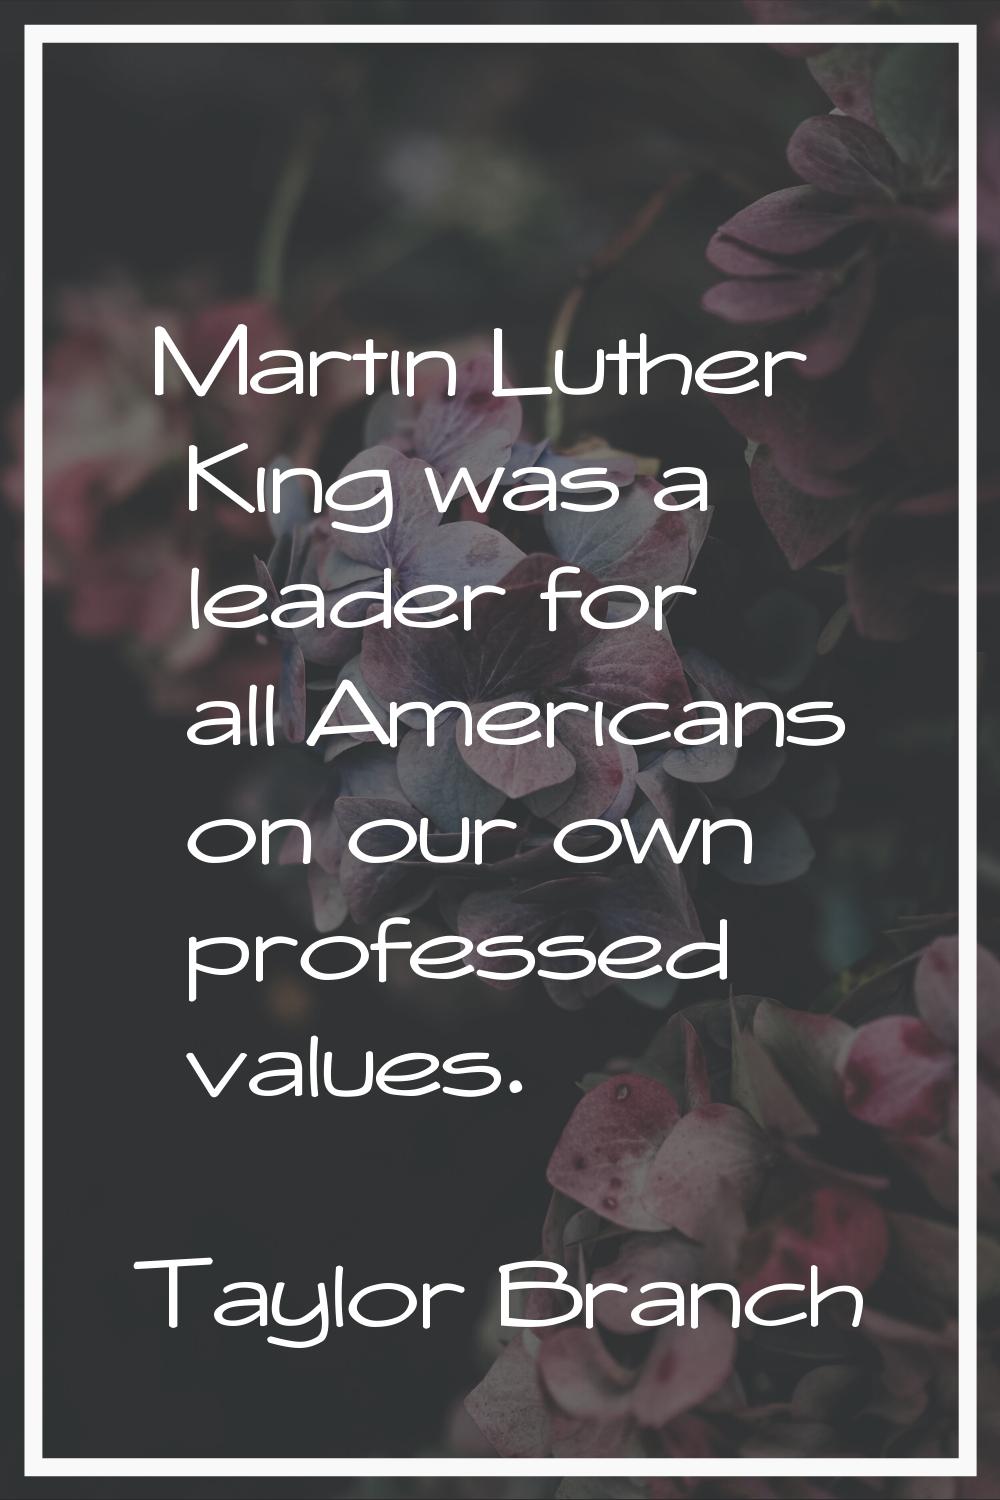 Martin Luther King was a leader for all Americans on our own professed values.